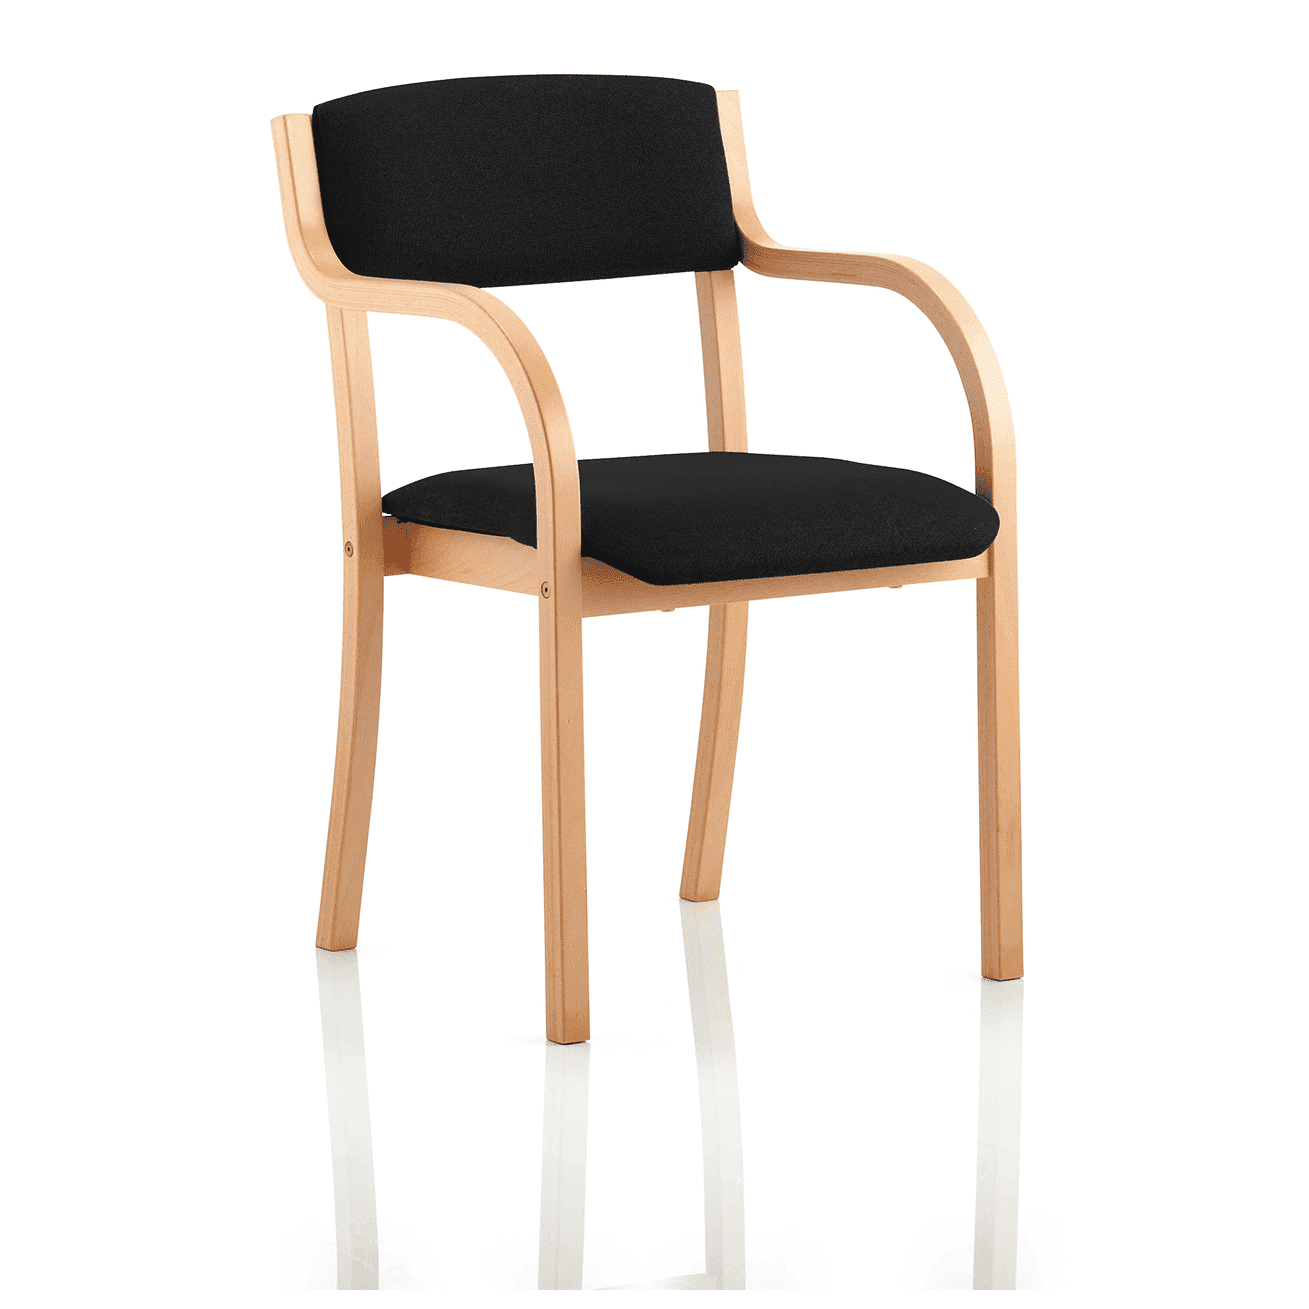 Madrid Wooden Frame Visitor Chair with Arms - Fabric Seat & Back, Stackable, 115kg Capacity, 8hr Usage, 1yr Guarantee